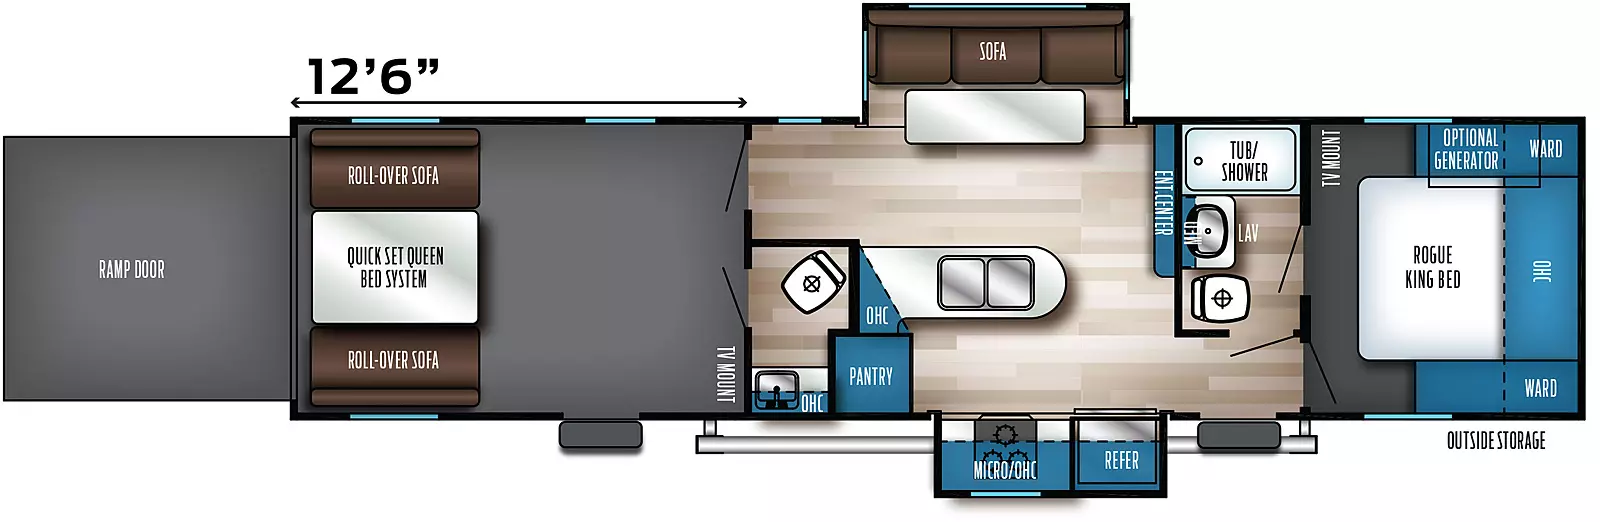 The 32SUT has two slideouts and two entries. Exterior features outside storage, optional generator, and rear ramp door. Interior layout front to back: foot facing rogue king bed with overhead cabinet, and wardrobes on each side, and off-door side TV mount; off-door side full pass through bathroom with medicine cabinet; entry door; entertainment center along inner wall; off-door side slideout with sofa and table; door-side slideout with refrigerator, and kitchen counter with cooktop, microwave and overhead cabinet; door side pantry and peninsula kitchen counter with overhead cabinet and sink along inner wall; rear garage with second entry, half bathroom, TV mount, and rear opposing roll-over sofas with quick set queen bed system. Garage dimensions: 12 foot 6 inches from rear to main living area.